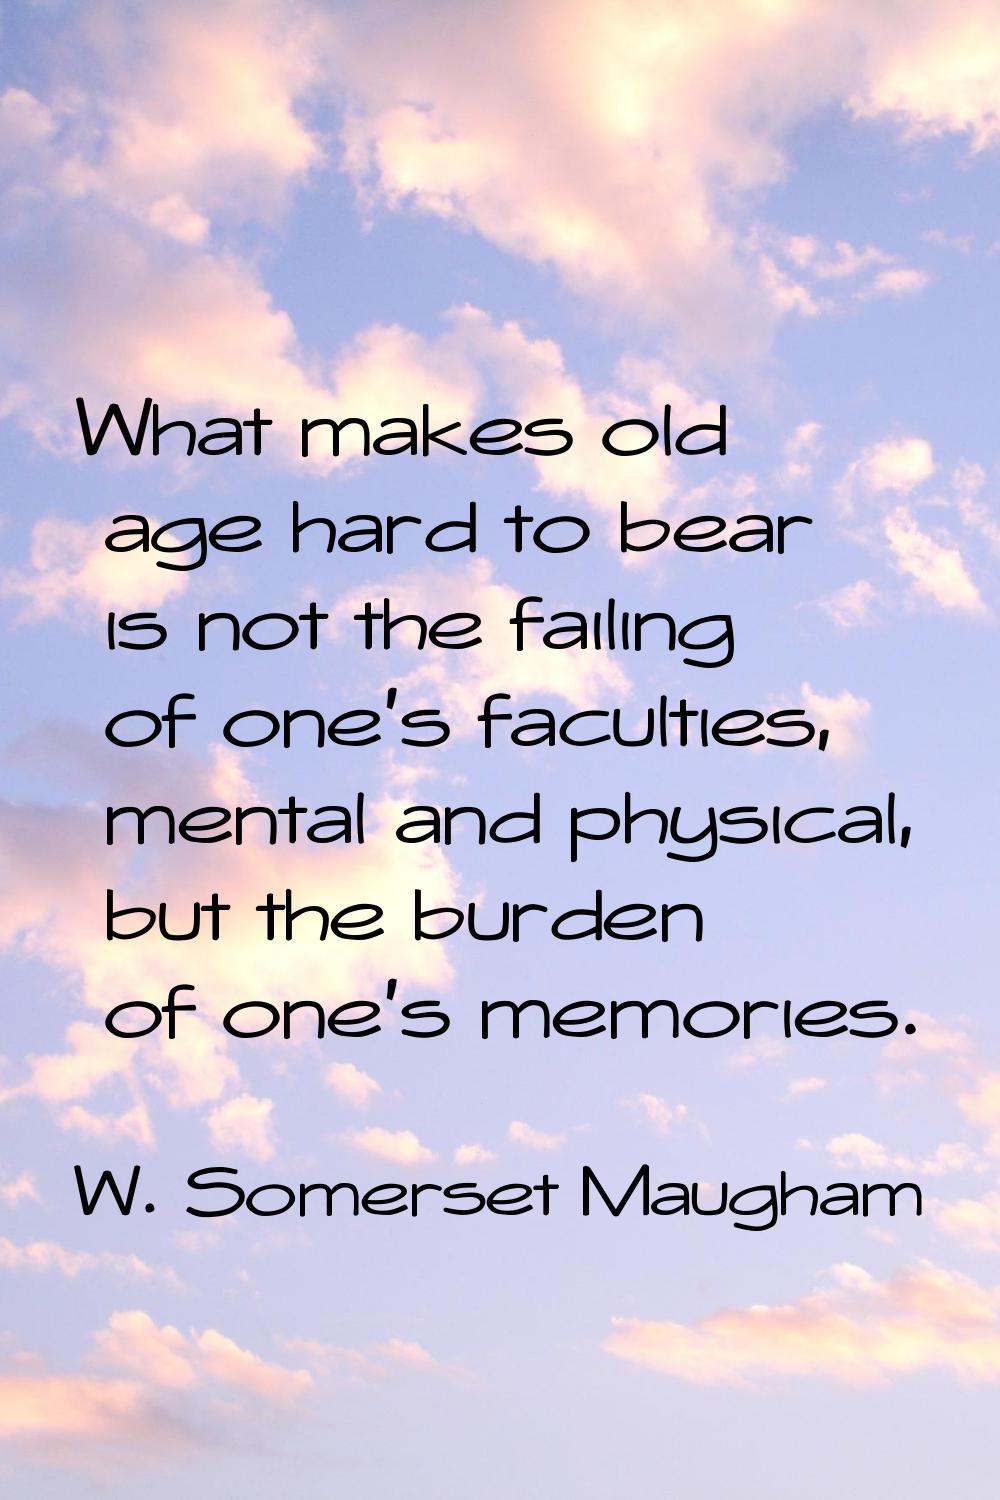 What makes old age hard to bear is not the failing of one's faculties, mental and physical, but the